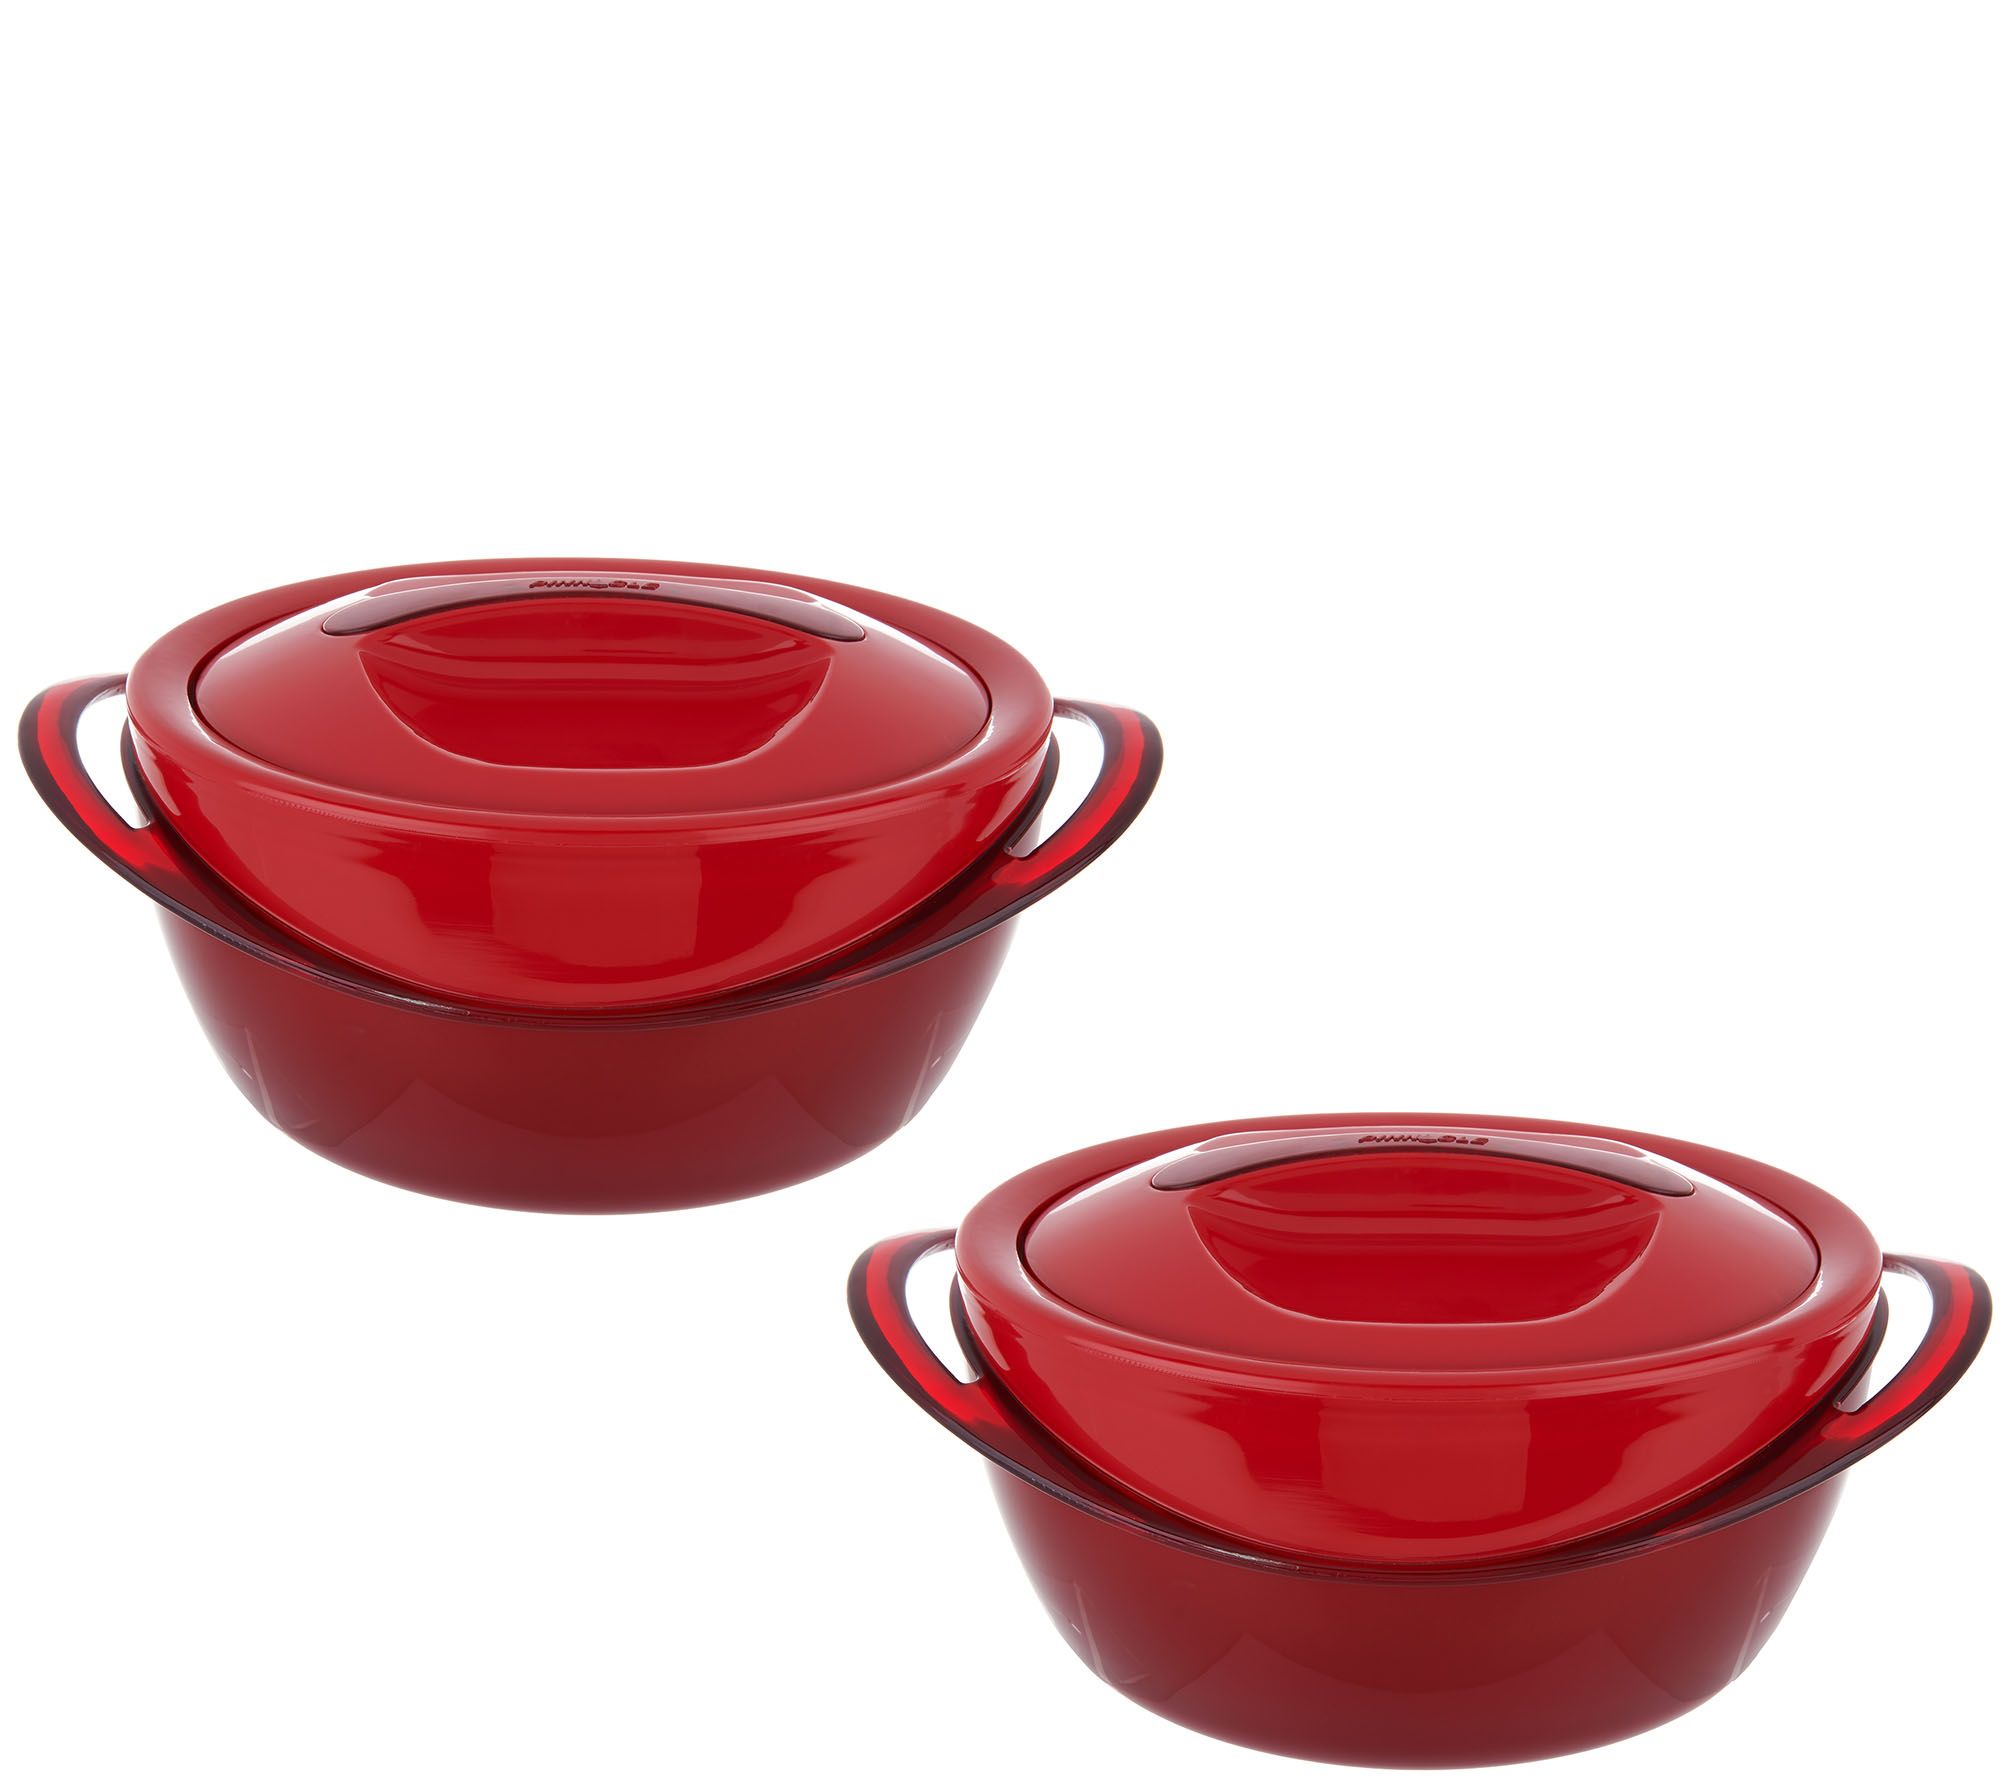 Set of 2 Thermal Hot/Cold Serving Bowls w/Lids on QVC 